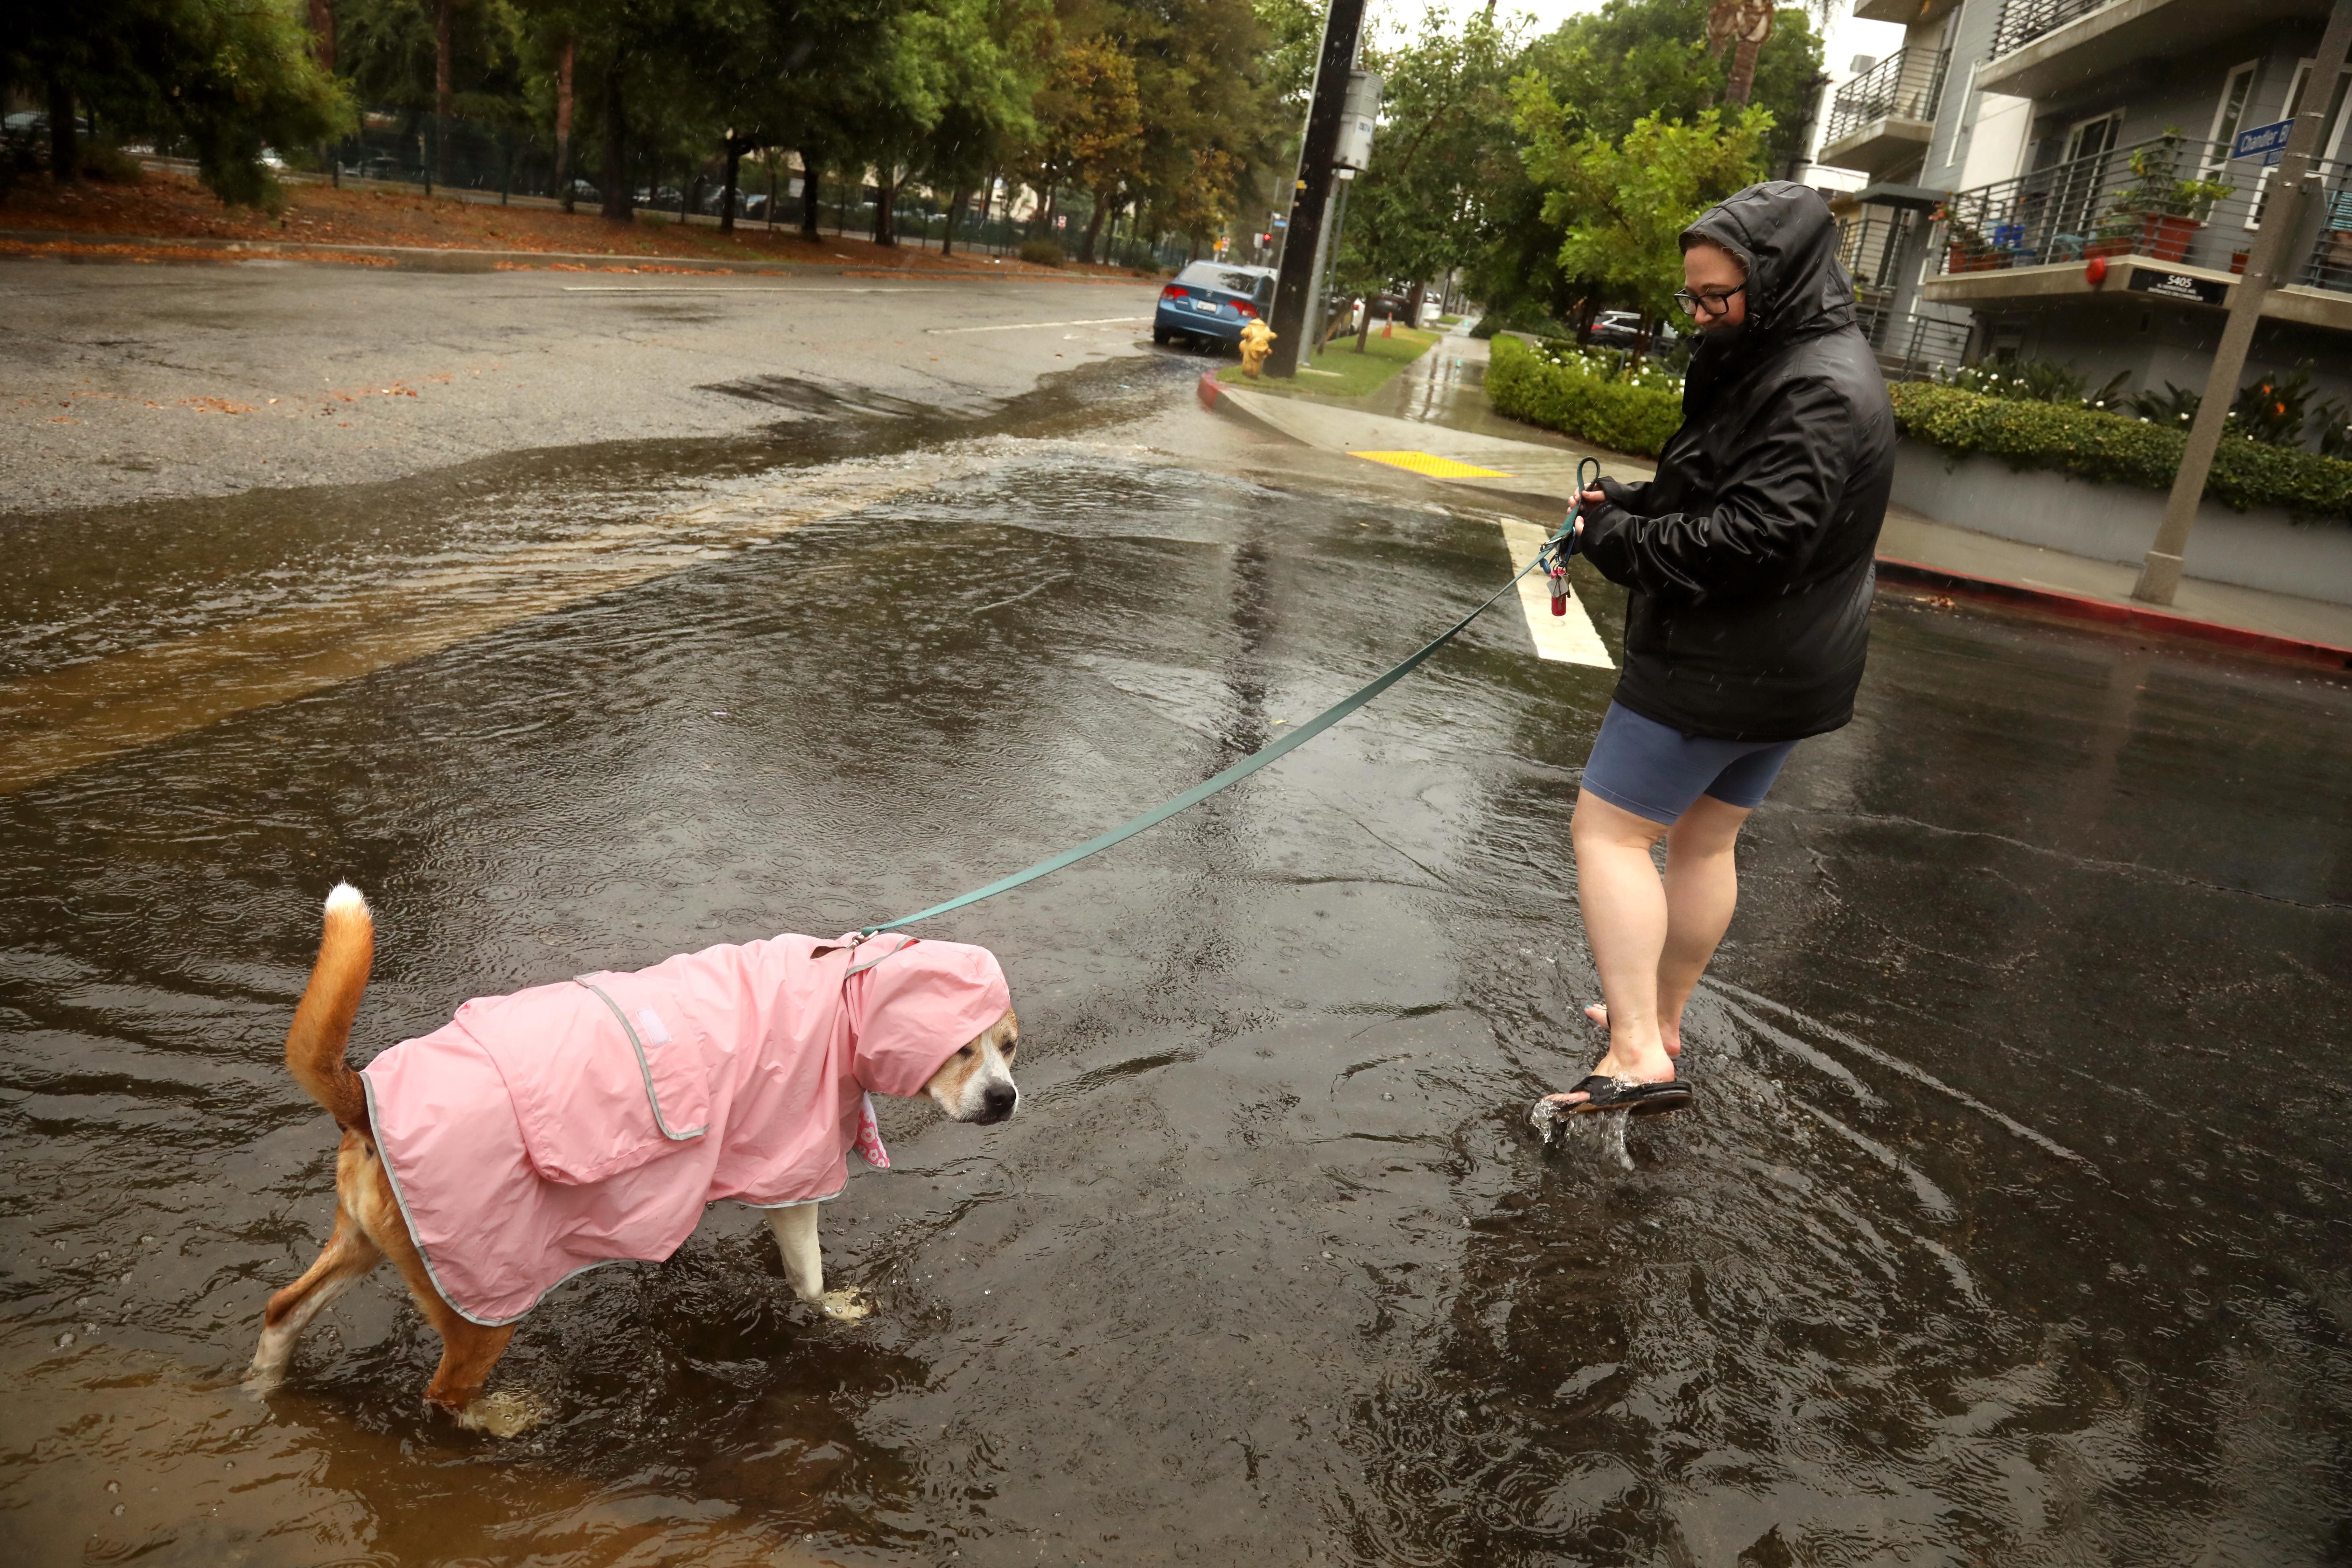 Hillary Tucker, 34, and her dog Oakley, make their way through a flooded street, due to rain from Hurricane Hilary, now a tropical storm, in Valley Village on August 20, 2023. Hillary, spelled with two "LL's" has been ribbed by her family that the hurricane was her namesake but said she was nicer than the weather event